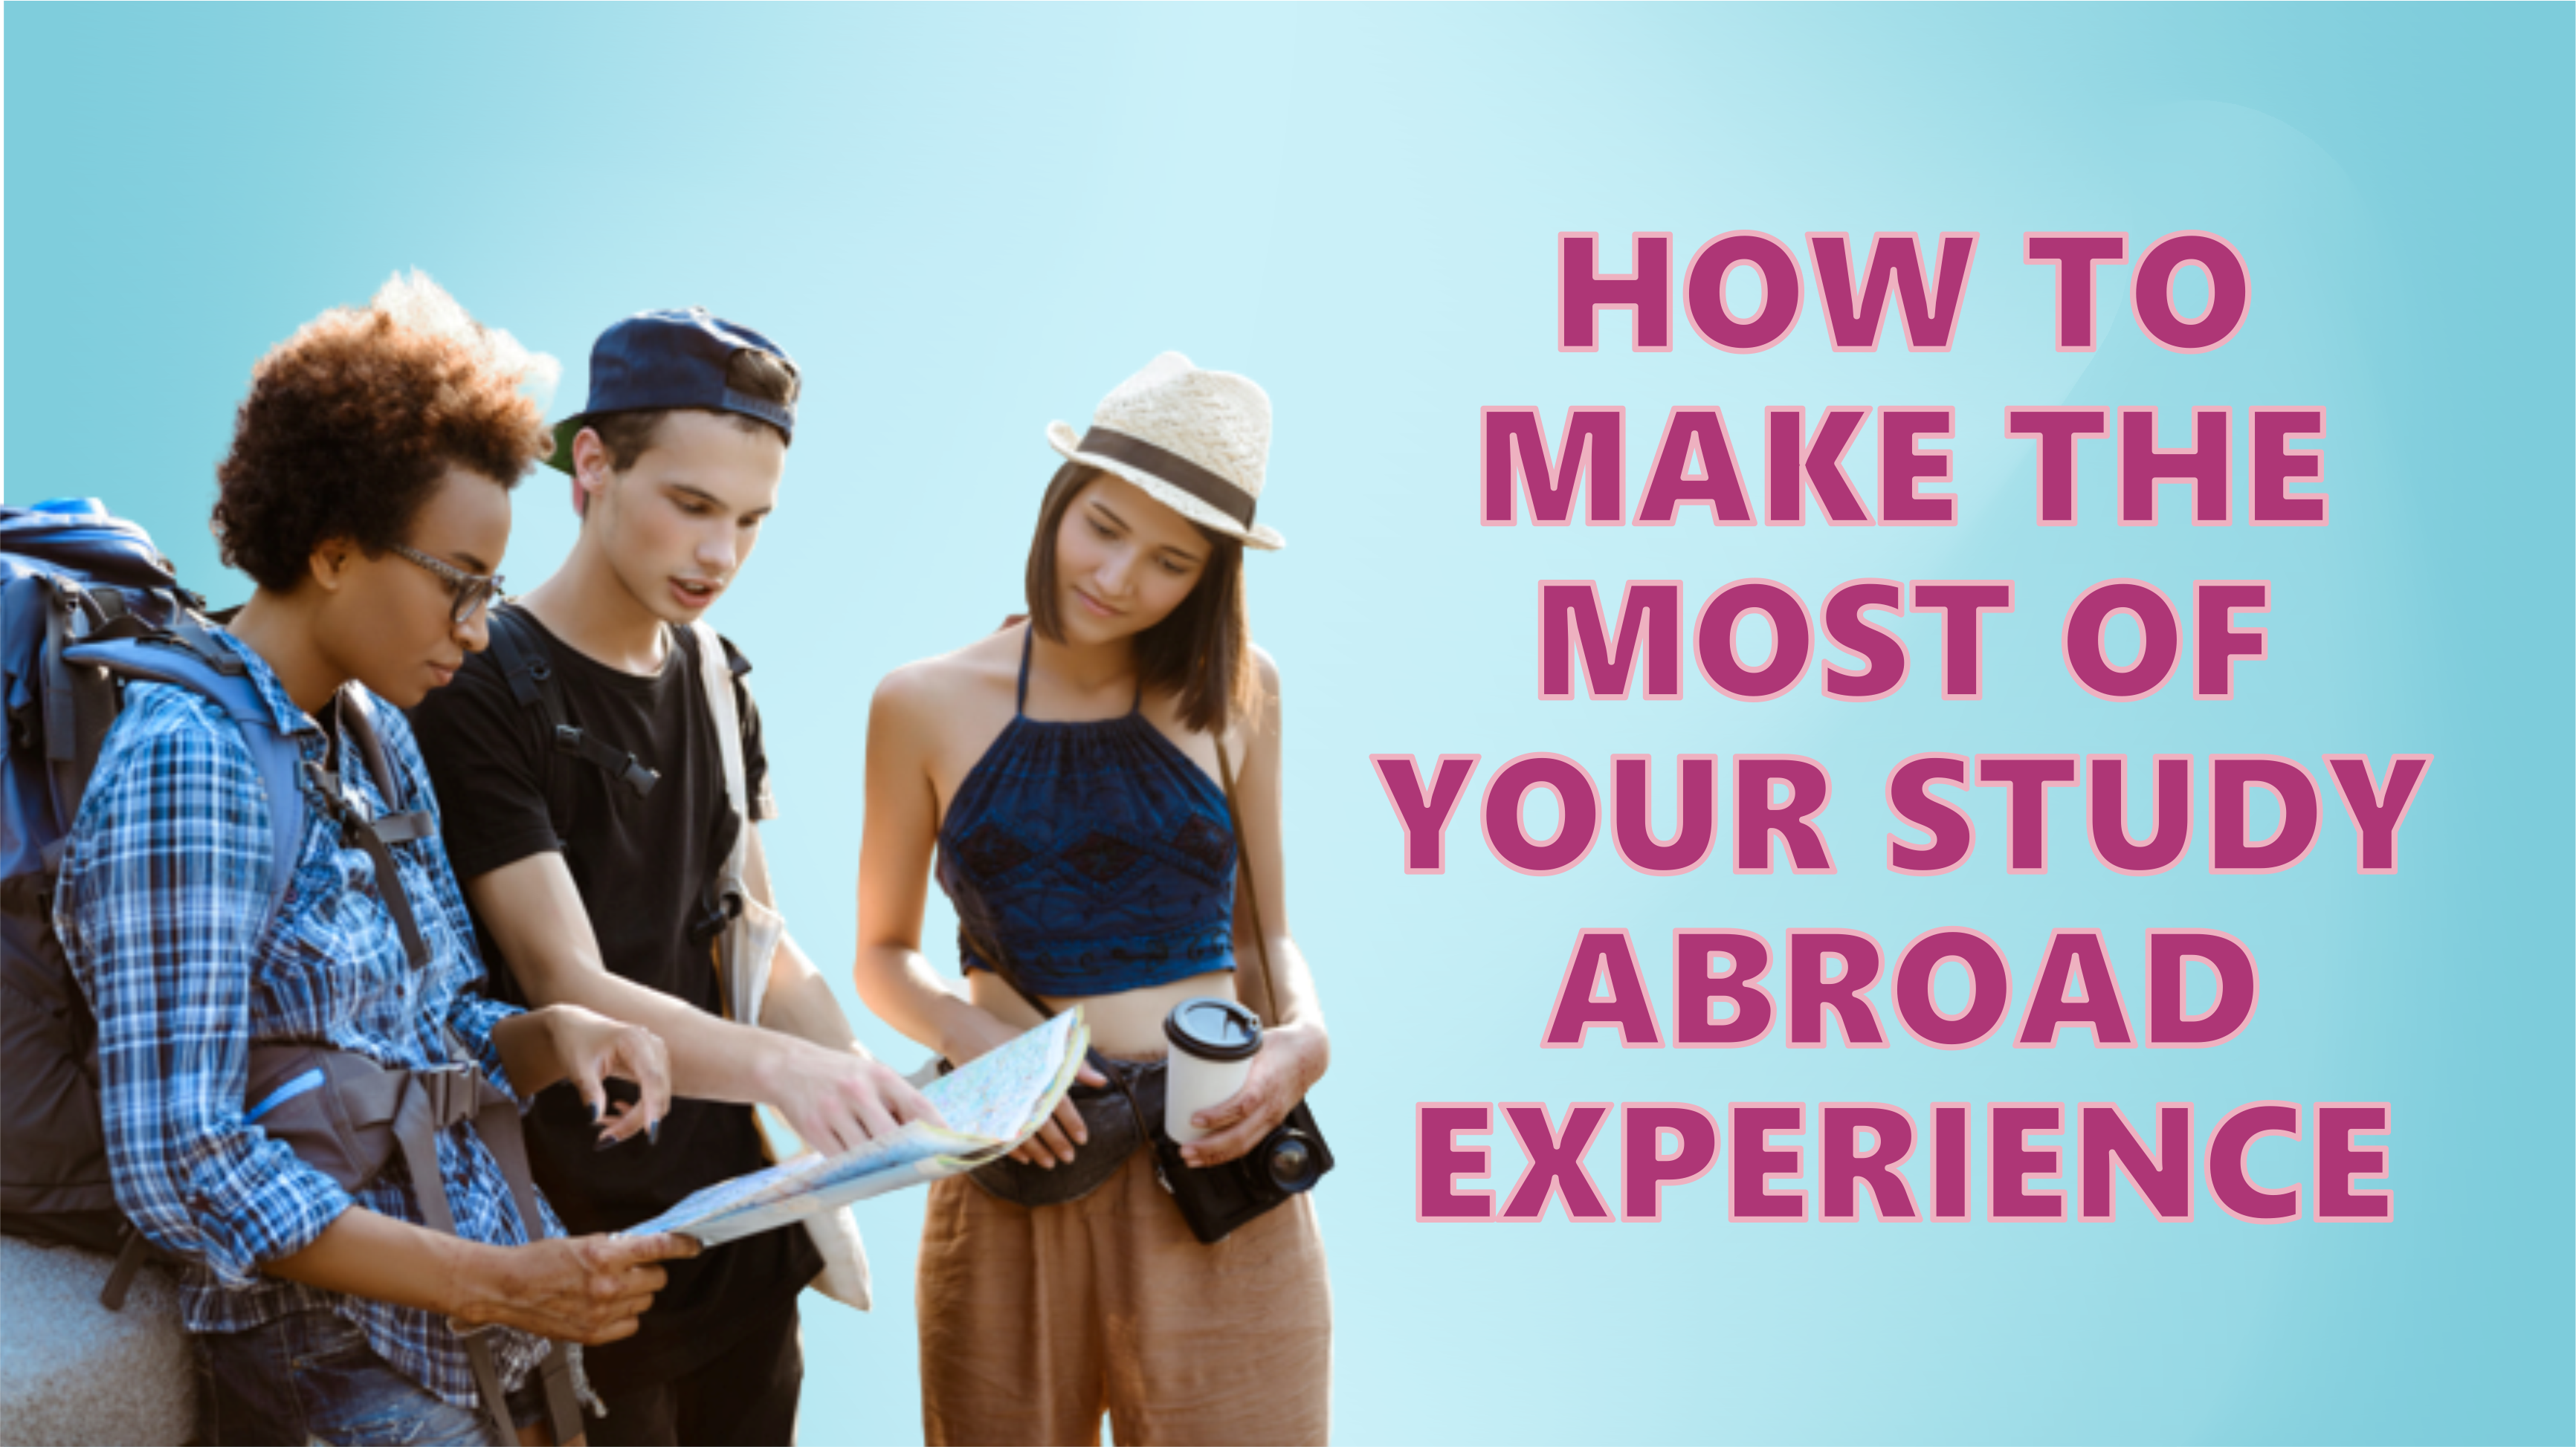 How to make the most of your study abroad experience